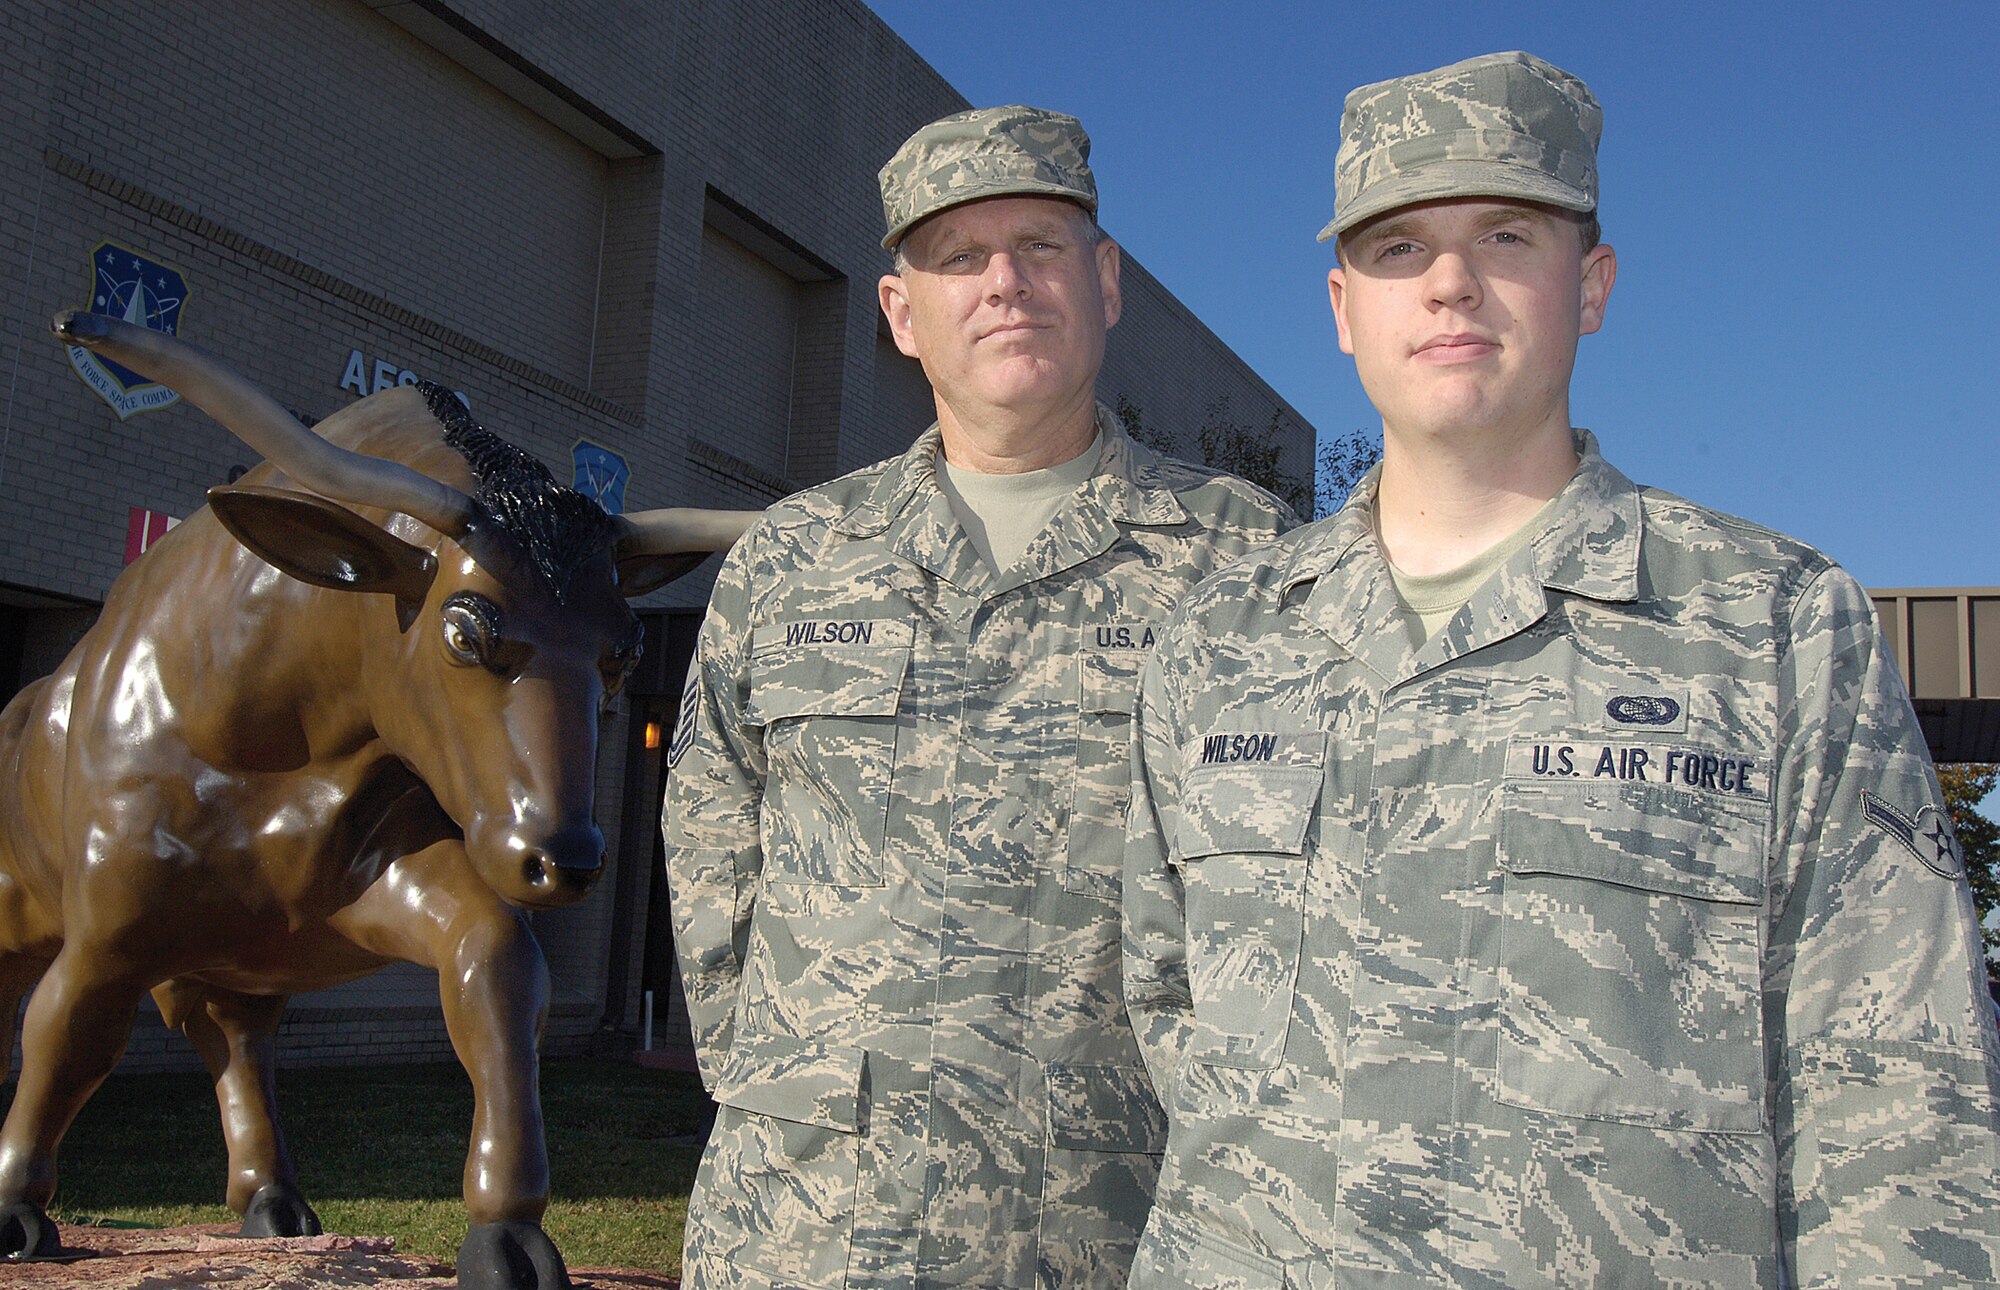 Master Sgt. Dennis Wilson, superintendent of the Base Level Systems Flight in the 31st Combat Communications Squadron is stationed in the same group as his son, Airman James Wilson, who is assigned to the 33rd Combat Communcations Squadron. (Air Force photo by Margo Wright)